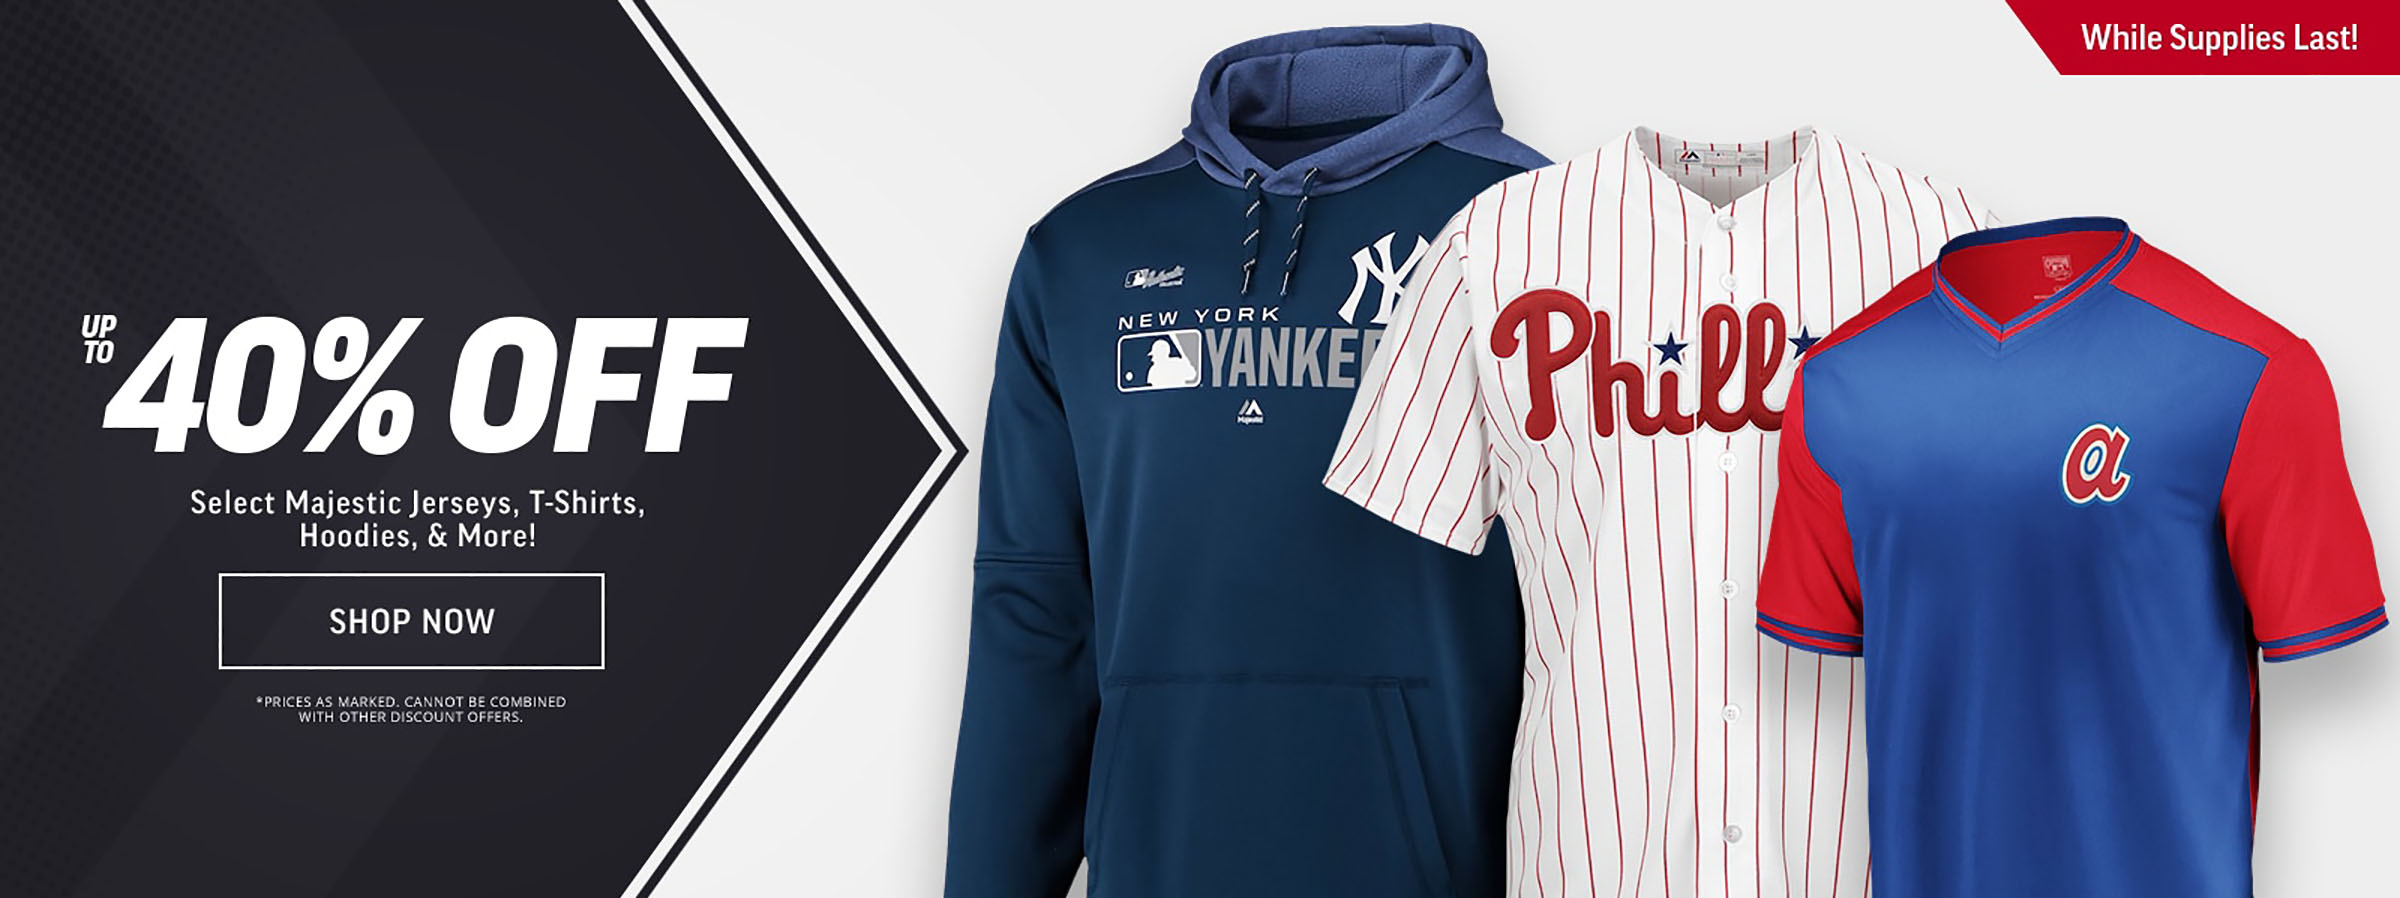 UP TO 40% OFF SELECT MAJESTIC JERSEYS, T-SHIRTS, HOODIES